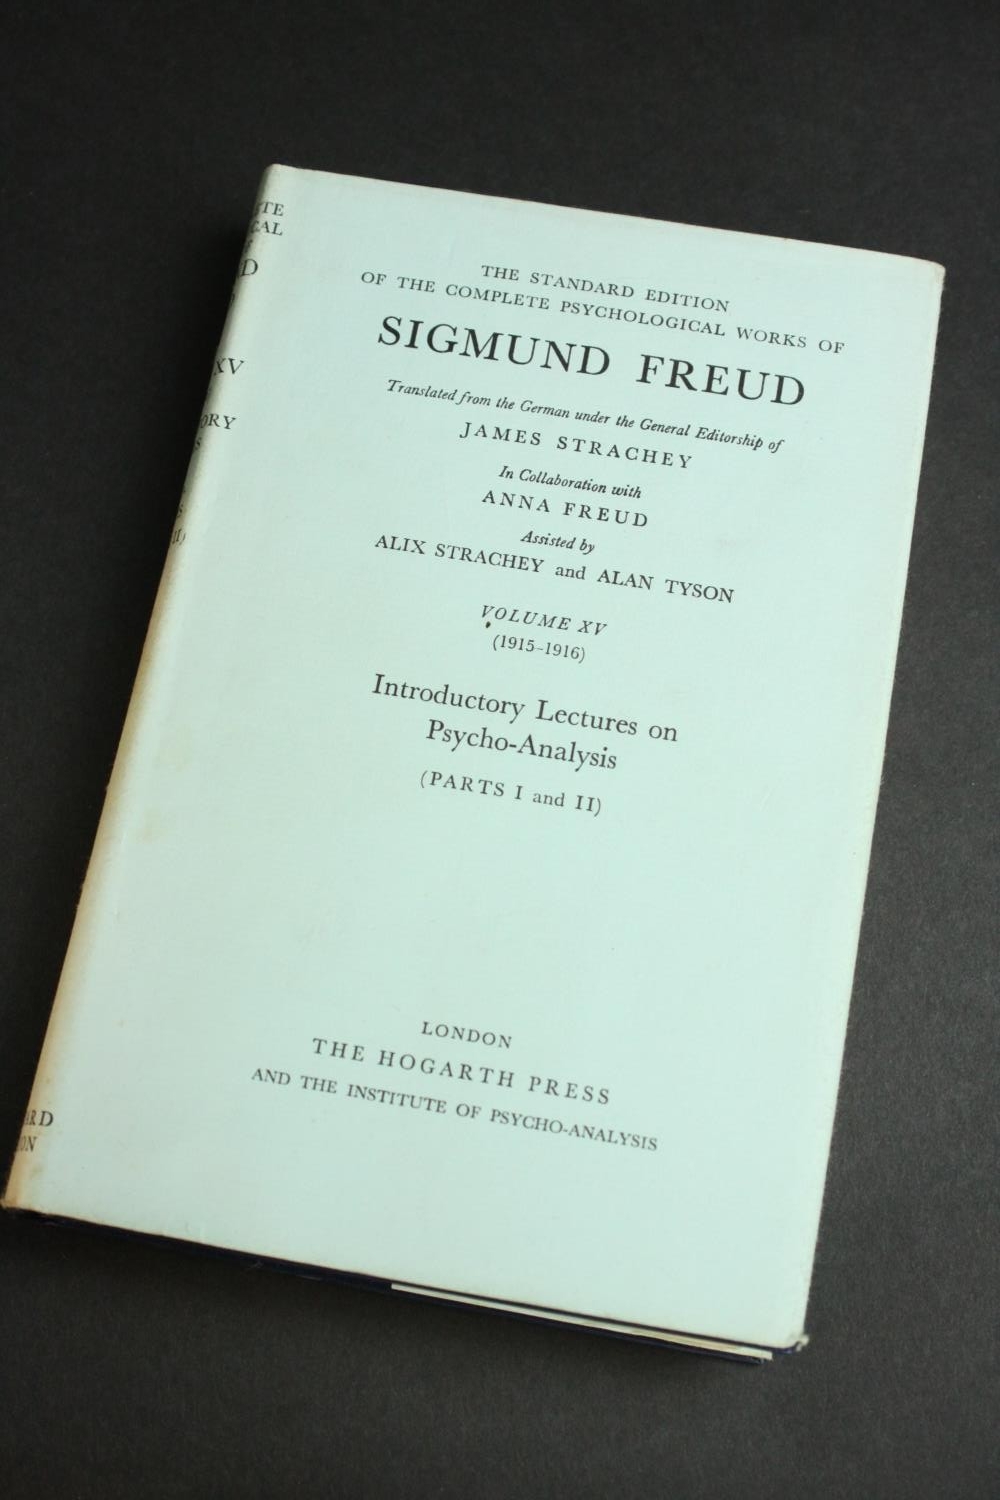 Sixteen volumes of the Complete Psychological Works of Sigmund Freud and other works by Sigmund - Image 3 of 7